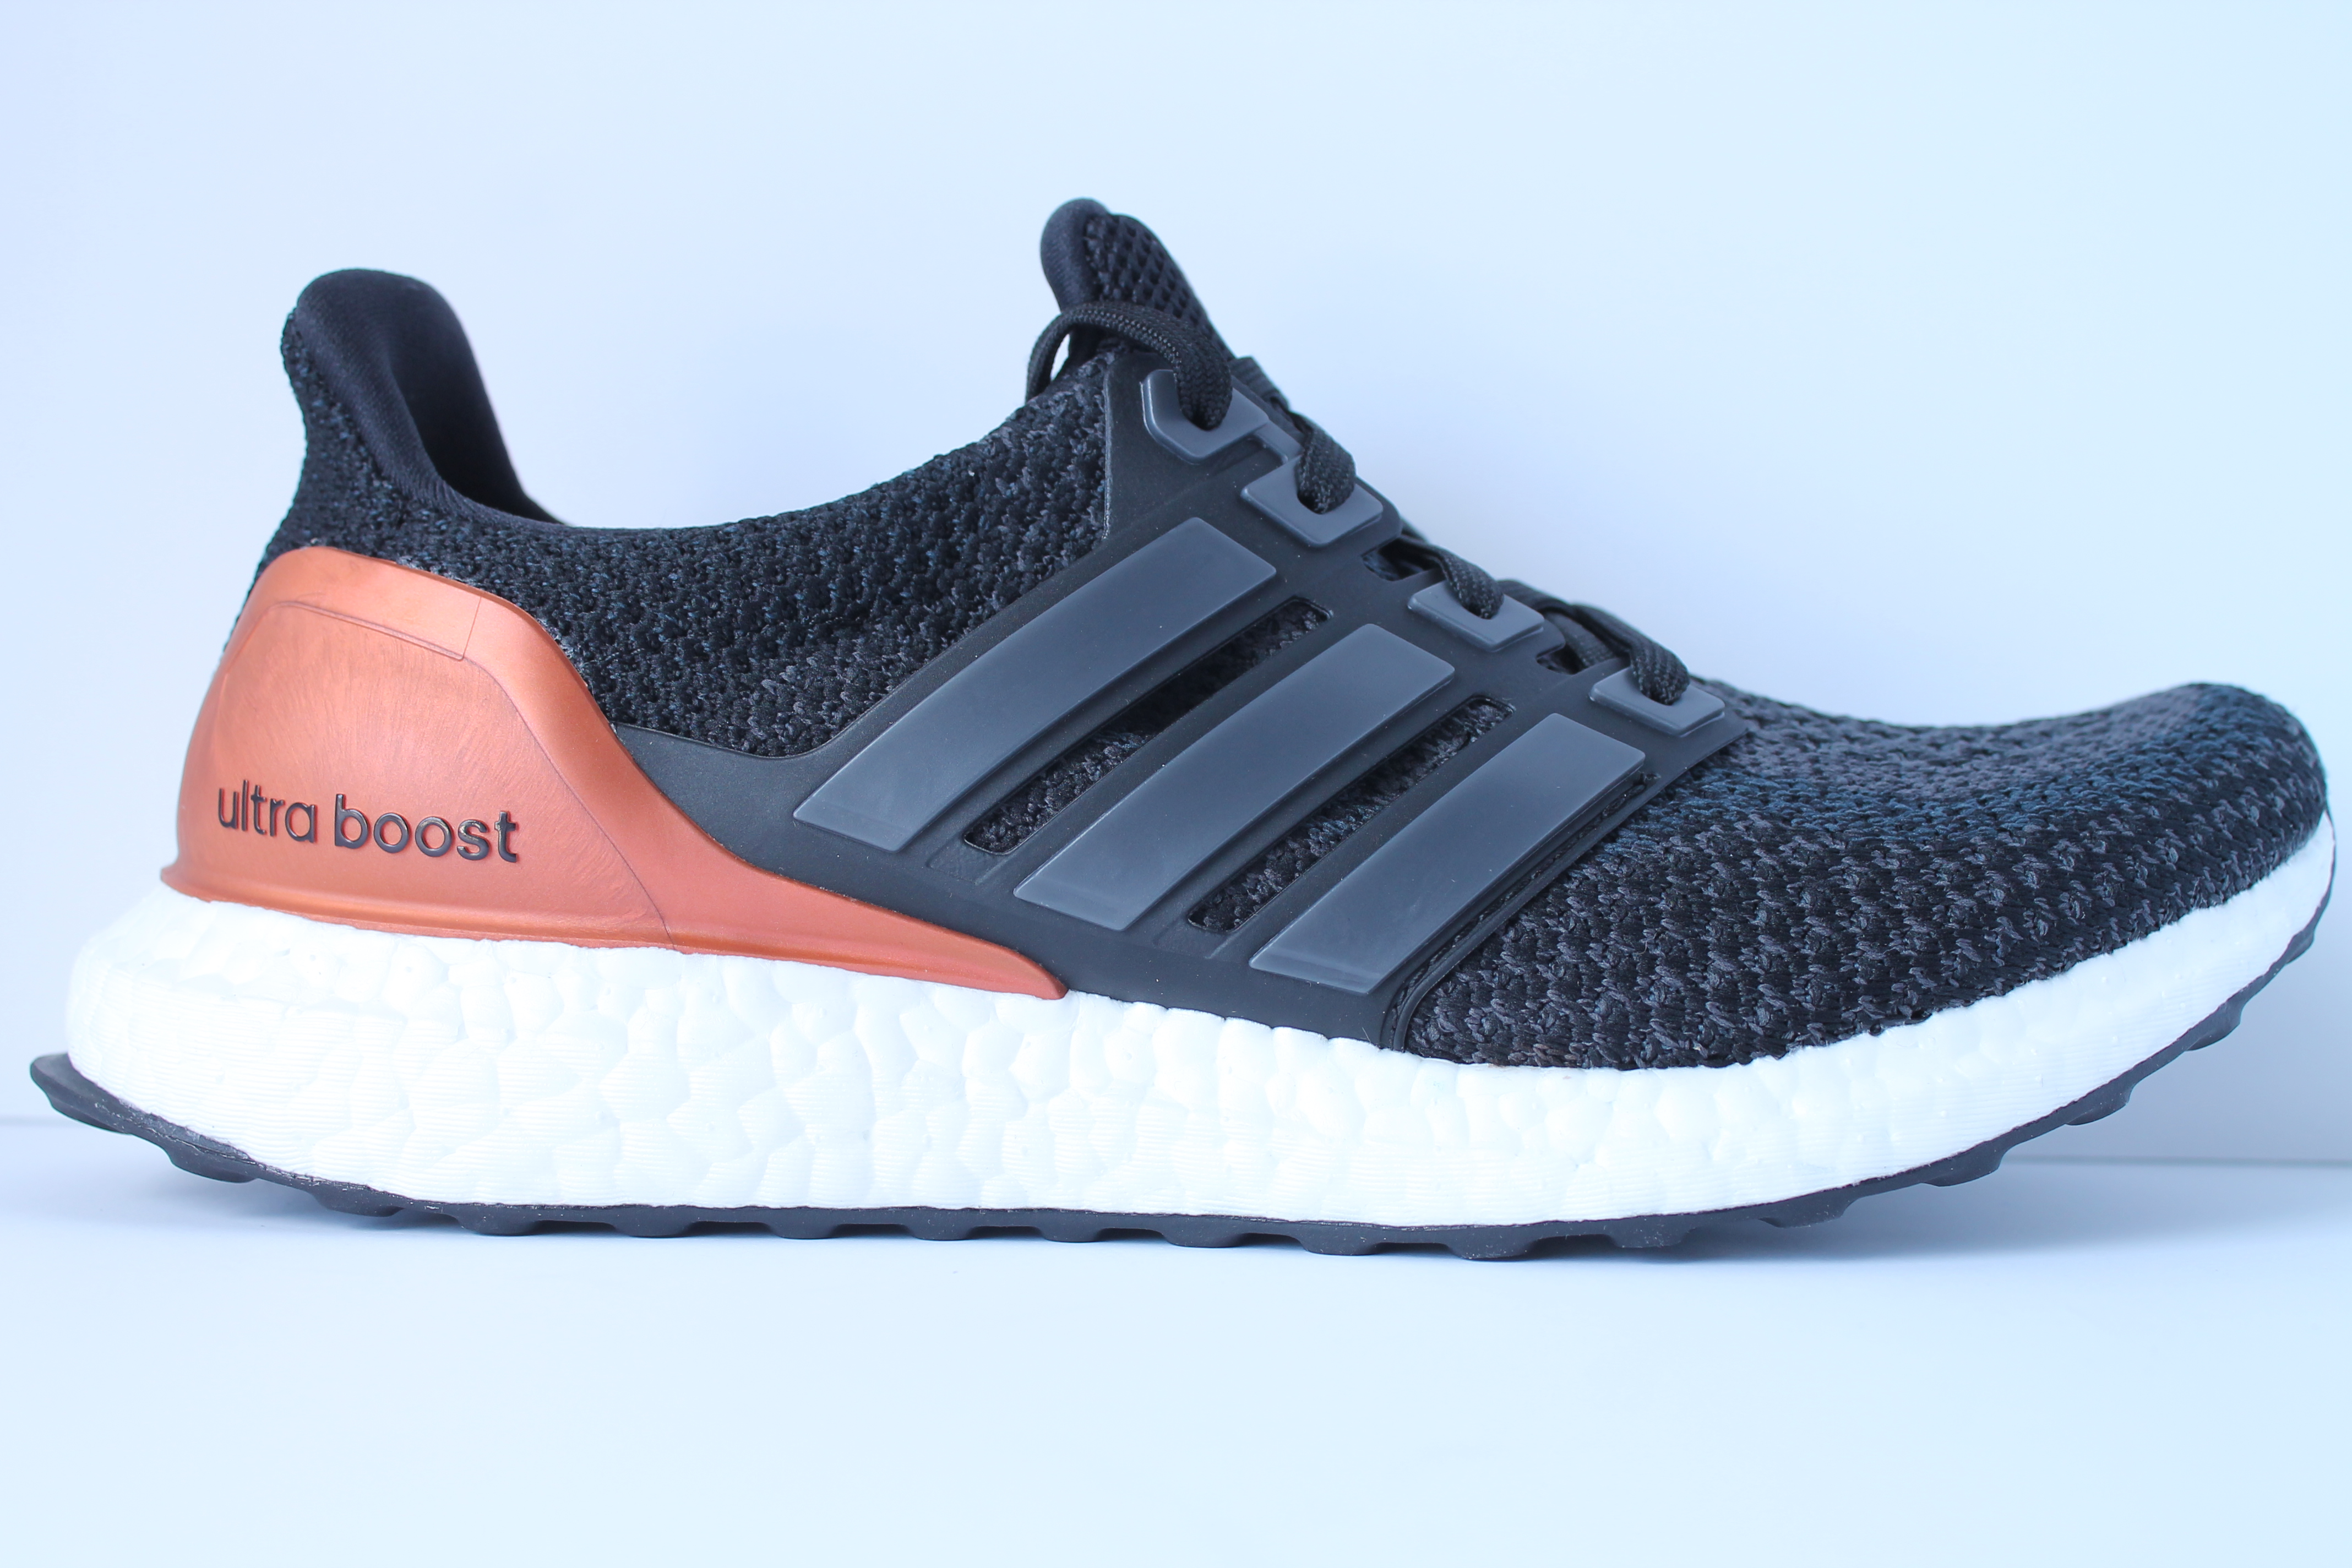 Adidas Ultra Boost LTD - Bronze Olympic Medal Pack